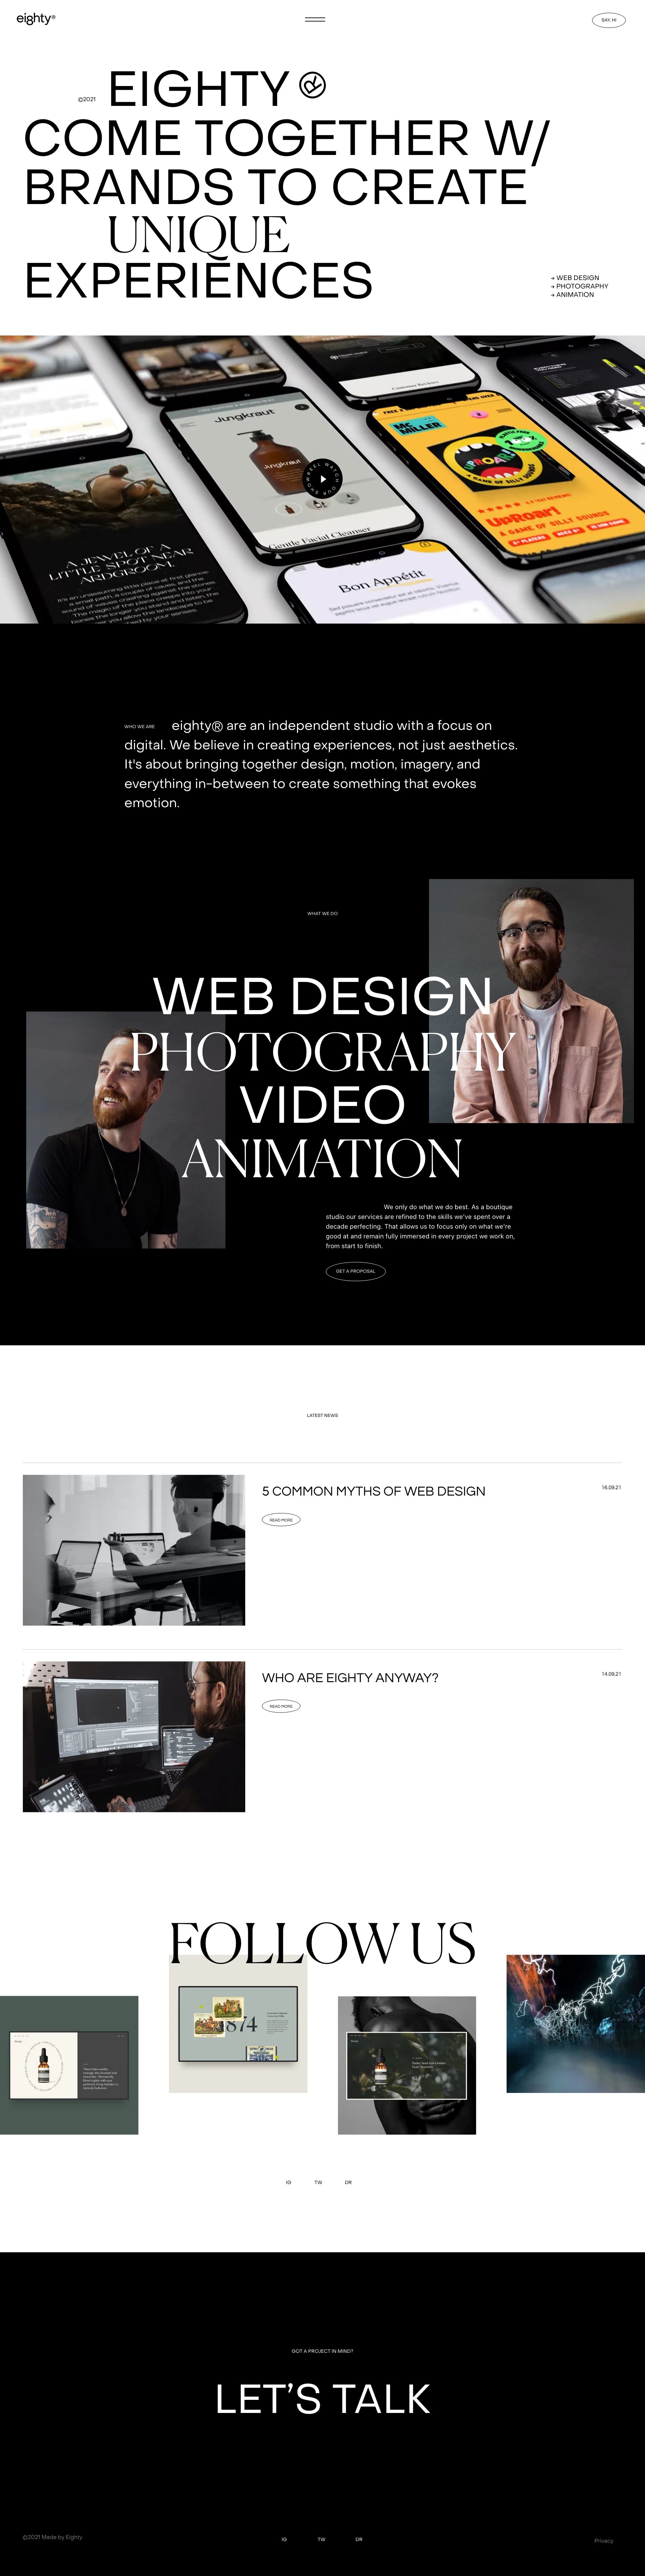 eighty Landing Page Example: eighty® are an independent studio with a focus on digital. We believe in creating experiences, not just aesthetics. It's about bringing together design, motion, imagery, and everything in-between to create something that evokes emotion.